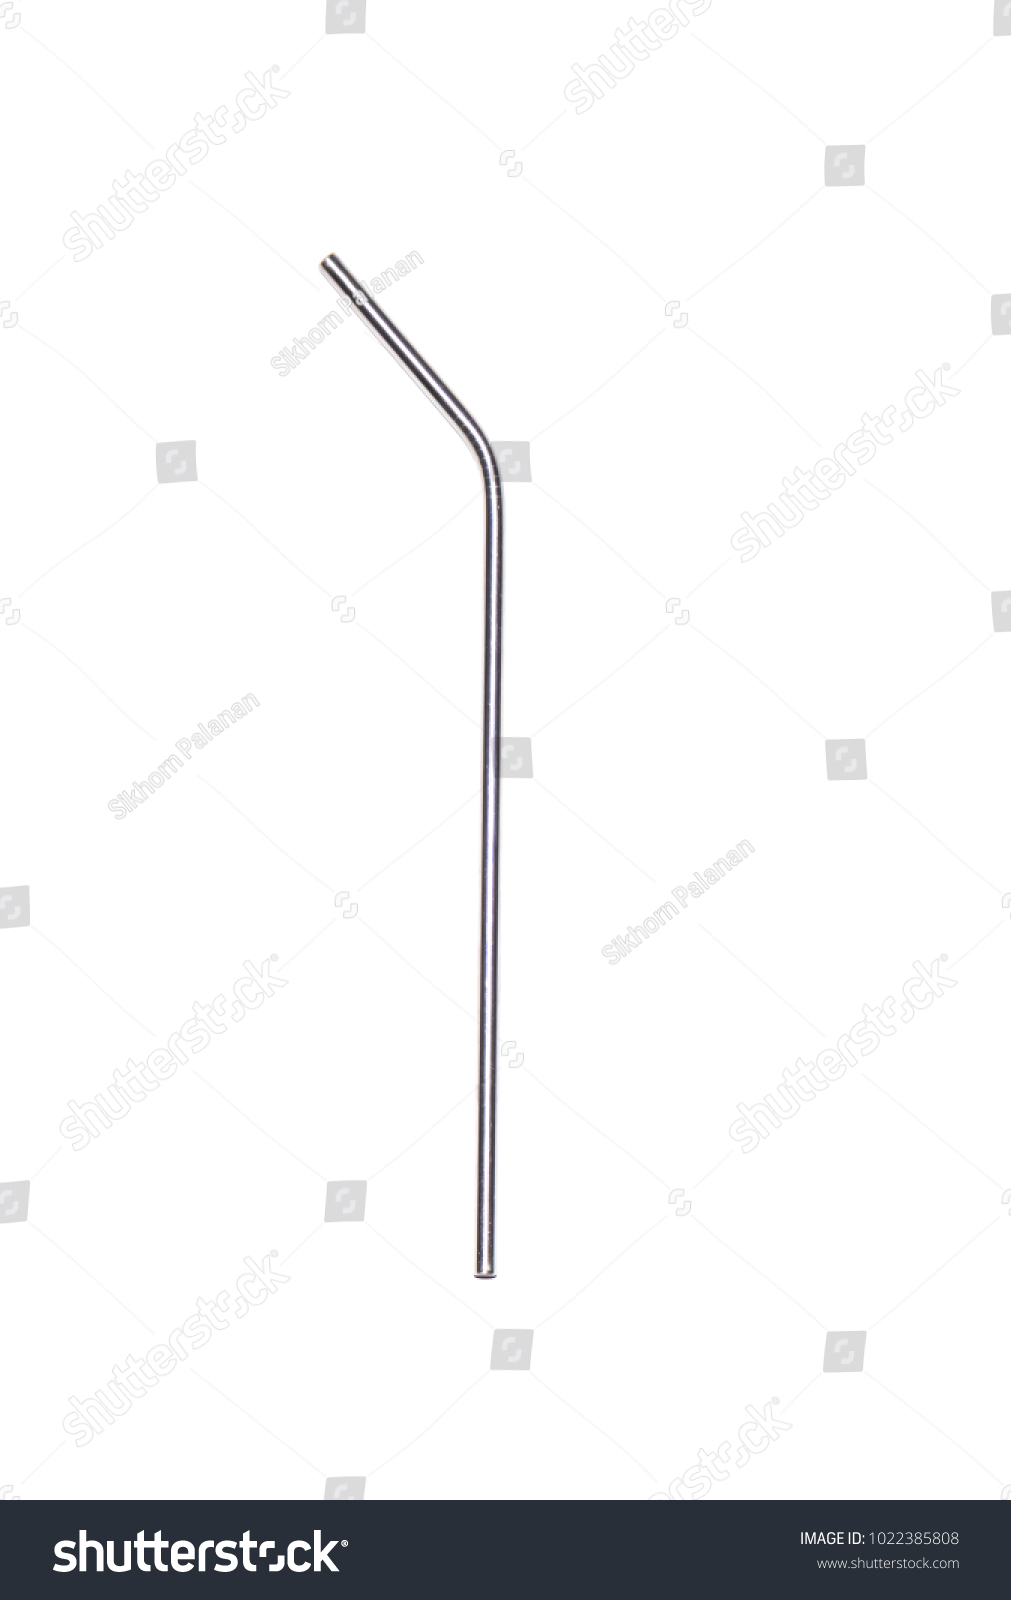 Stainless Steel Straw on white background
metal drinking straw #1022385808